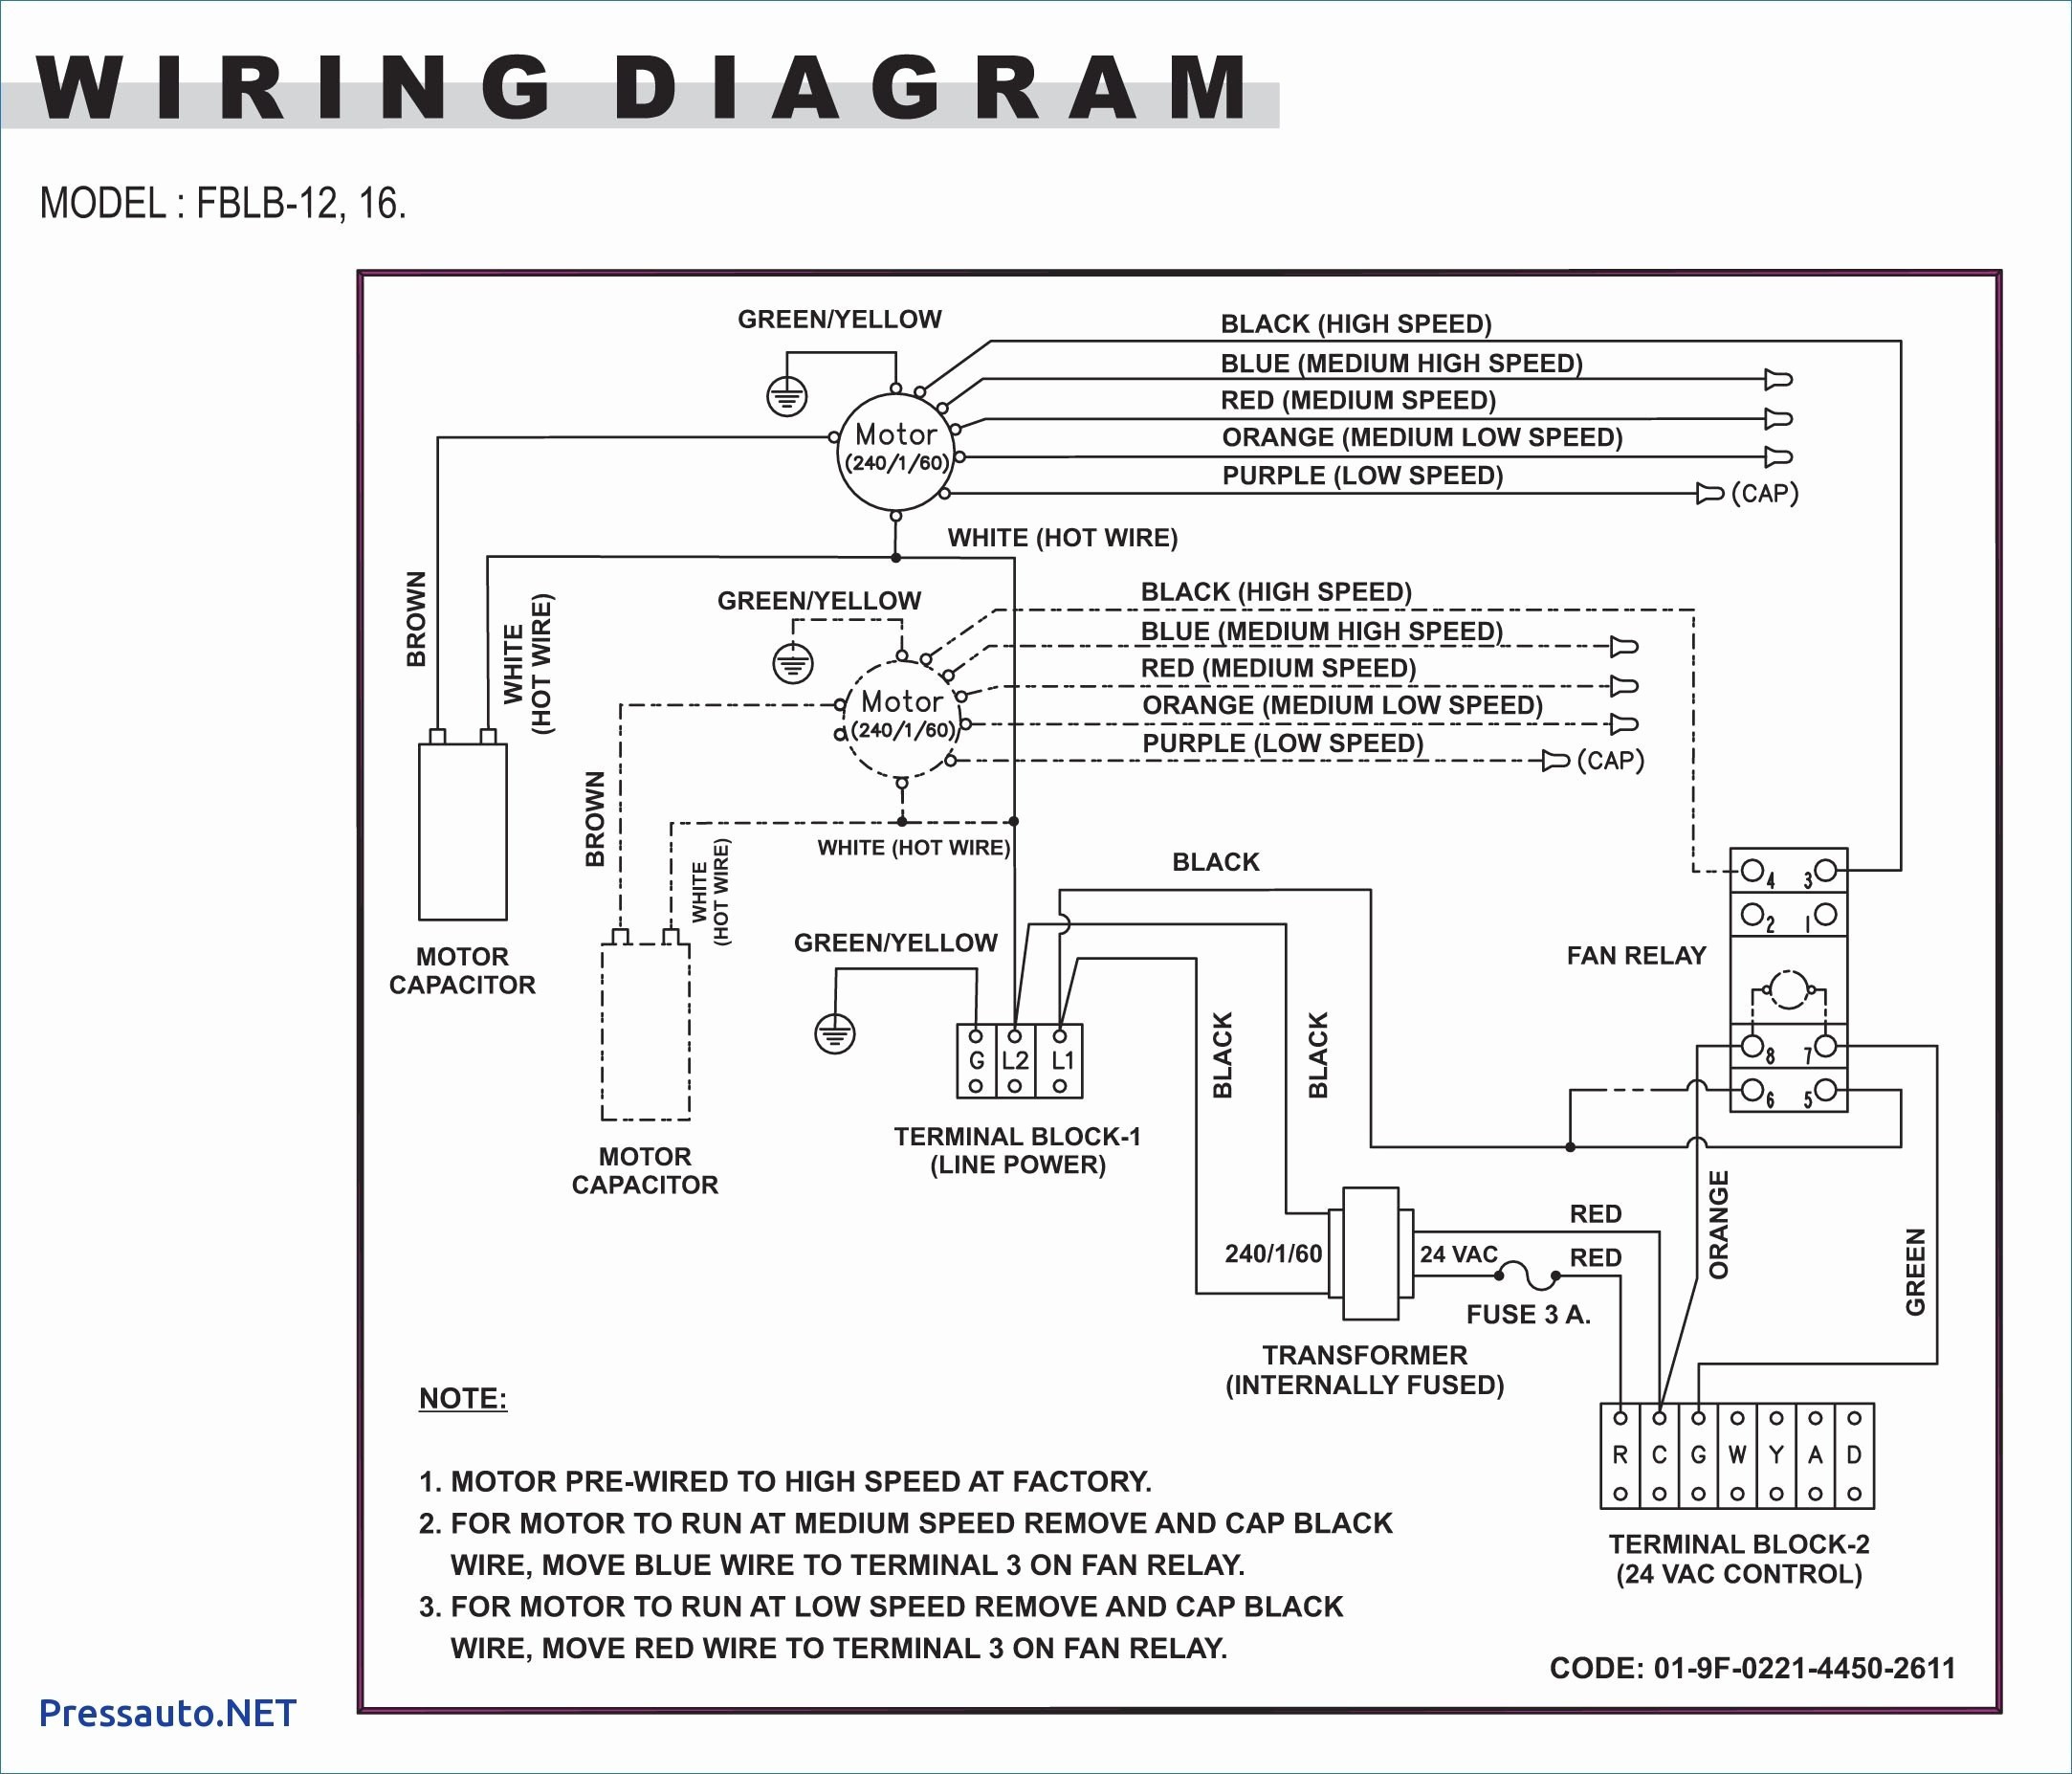 Wiring Schematic for Baseboard Heater Valid Wiring Diagram for Water Heater Best Wiring Diagram for 220v